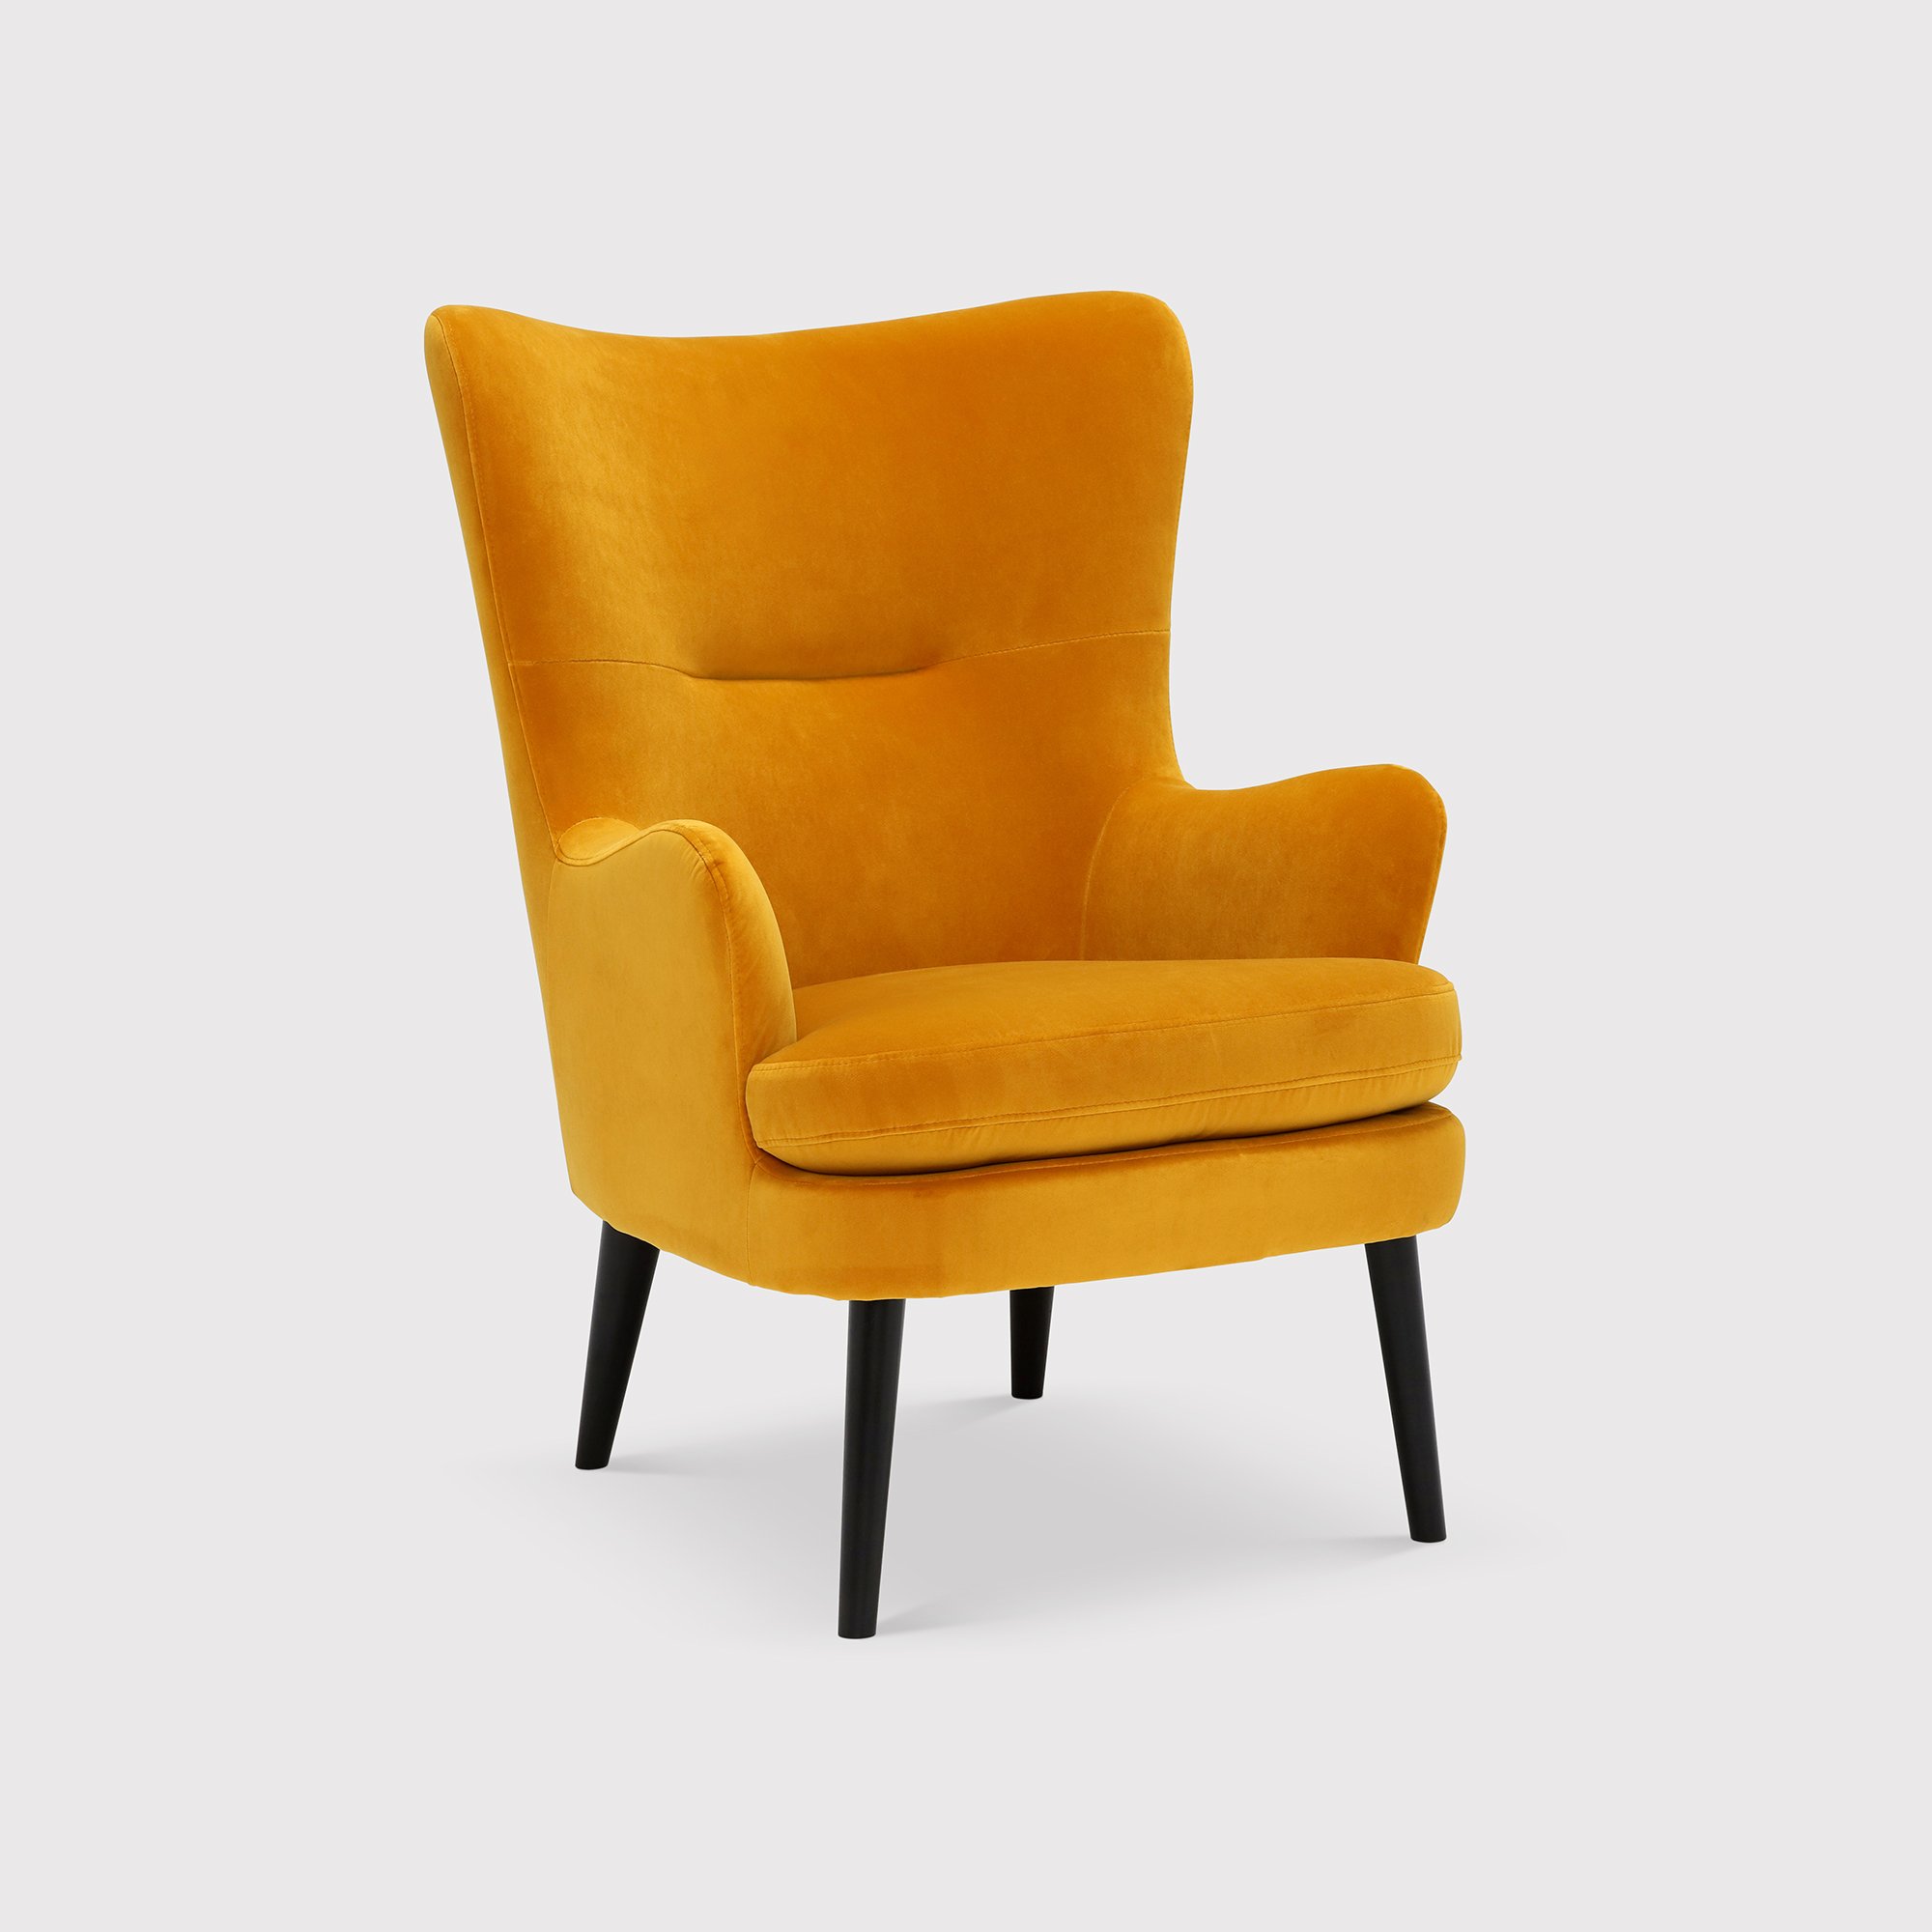 Marcy Highback Chair, Yellow Fabric | Barker & Stonehouse